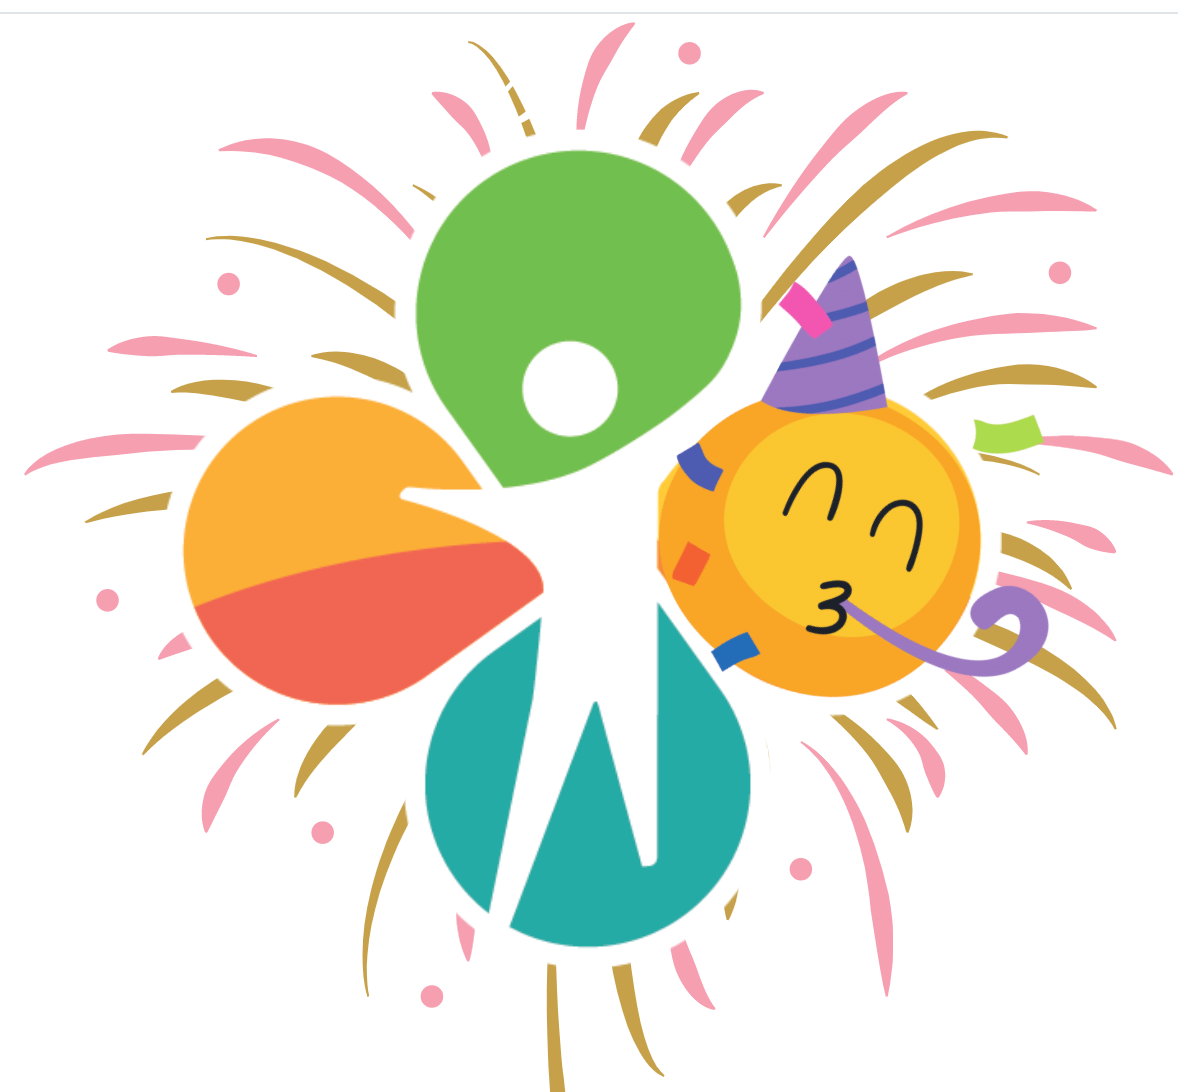 CV logo with some fireworks coming out of it and one of the petals has been turned into a small face with a party hat, blowing a noise maker.